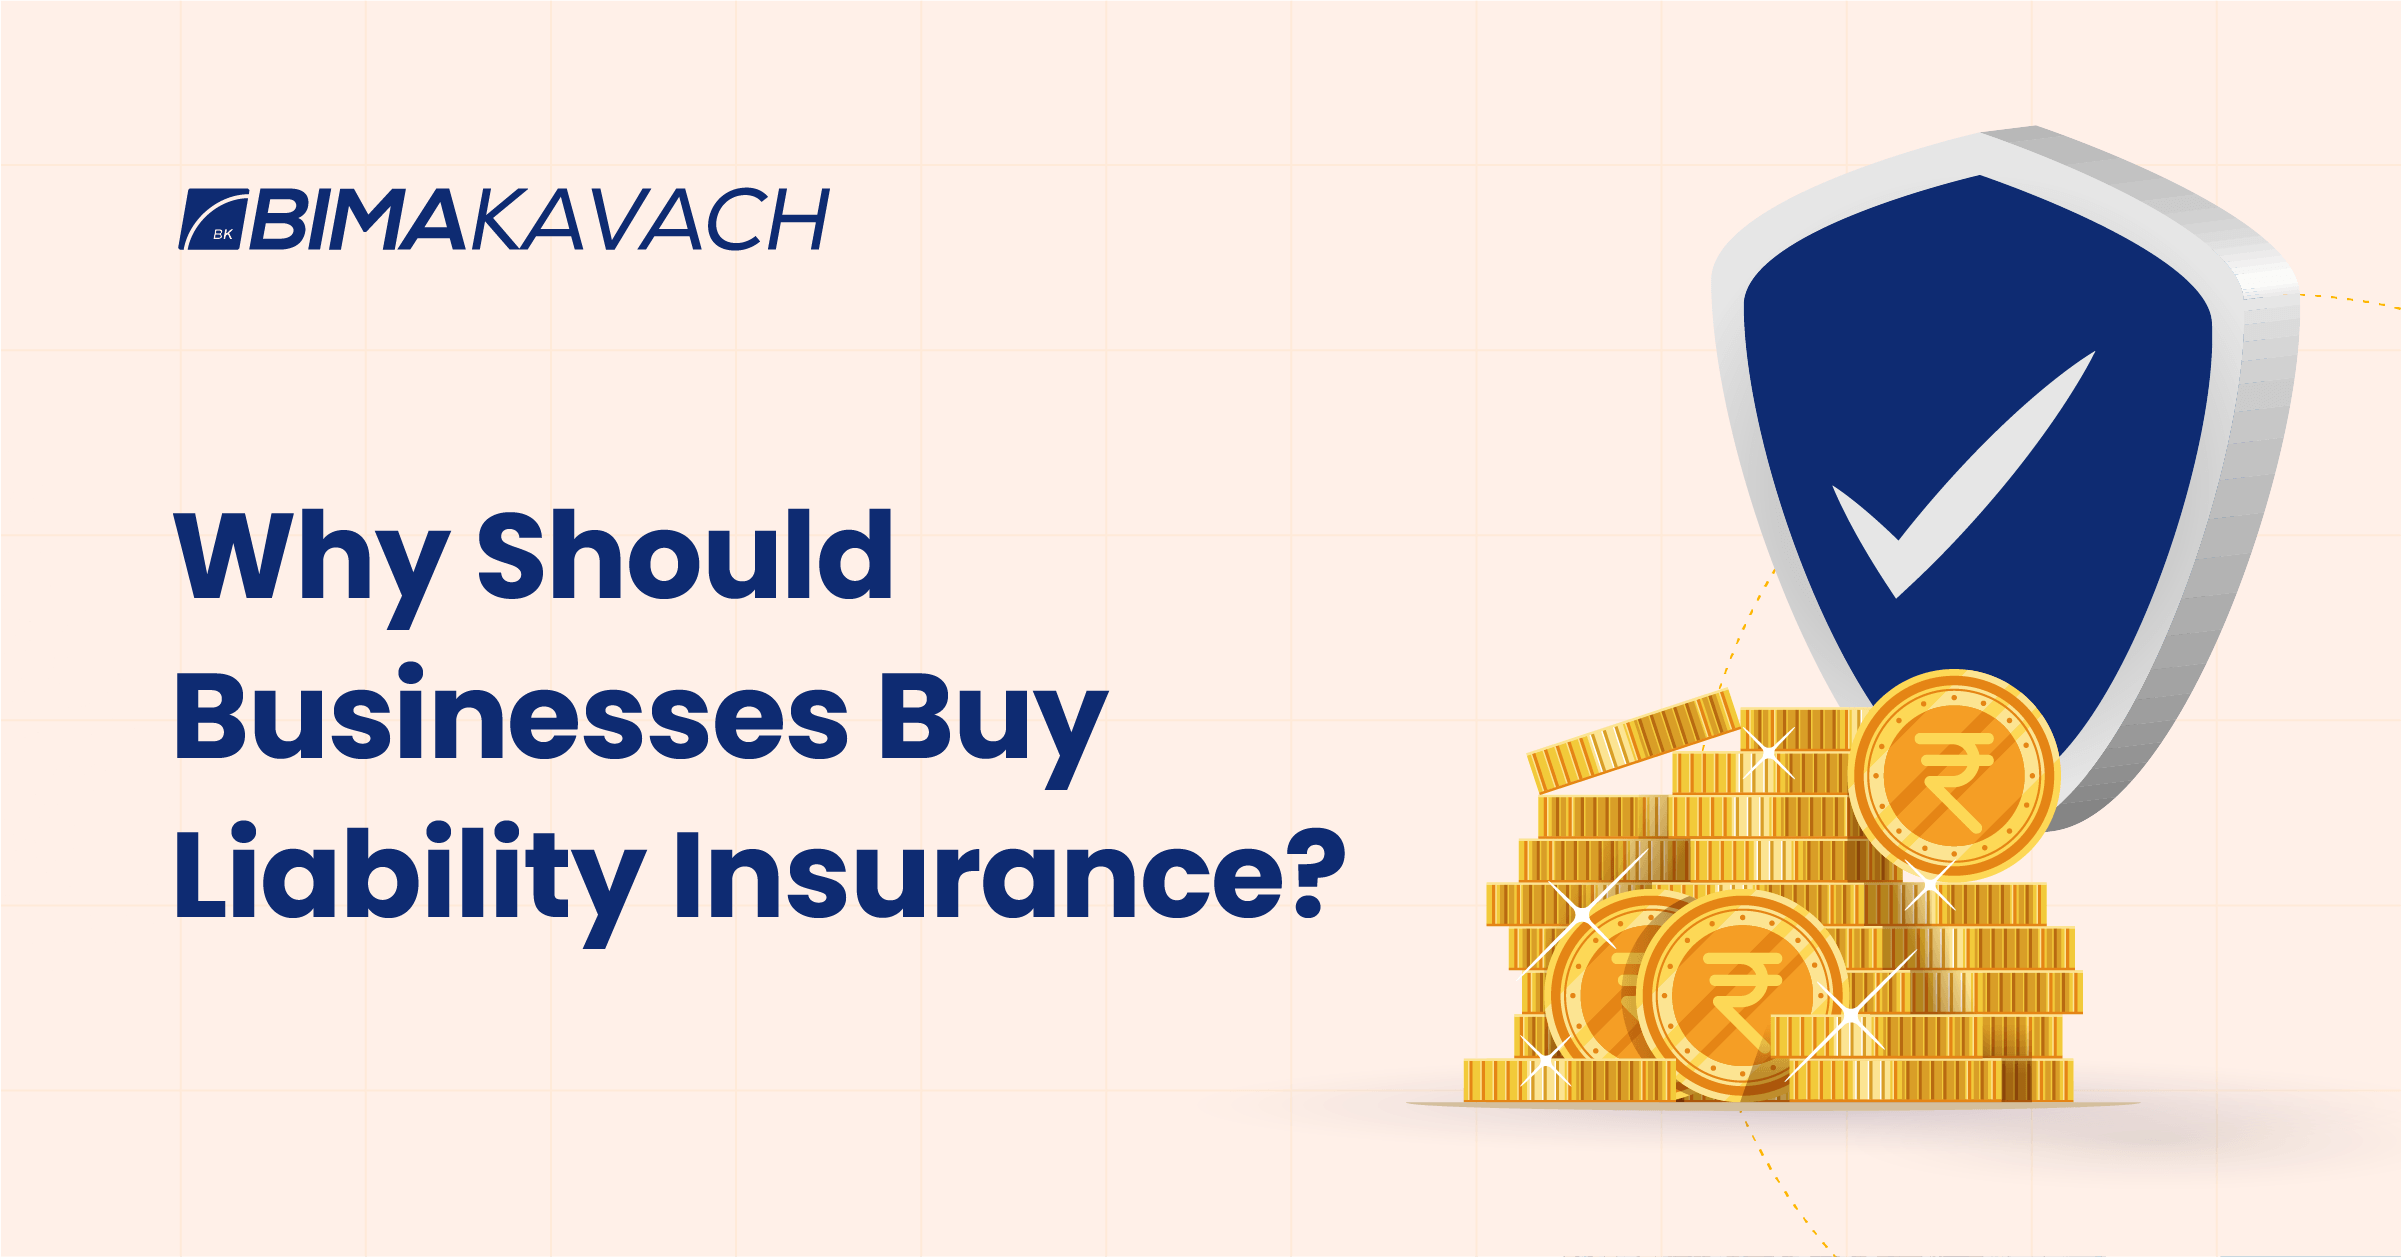 Why Should Businesses Buy Liability Insurance?